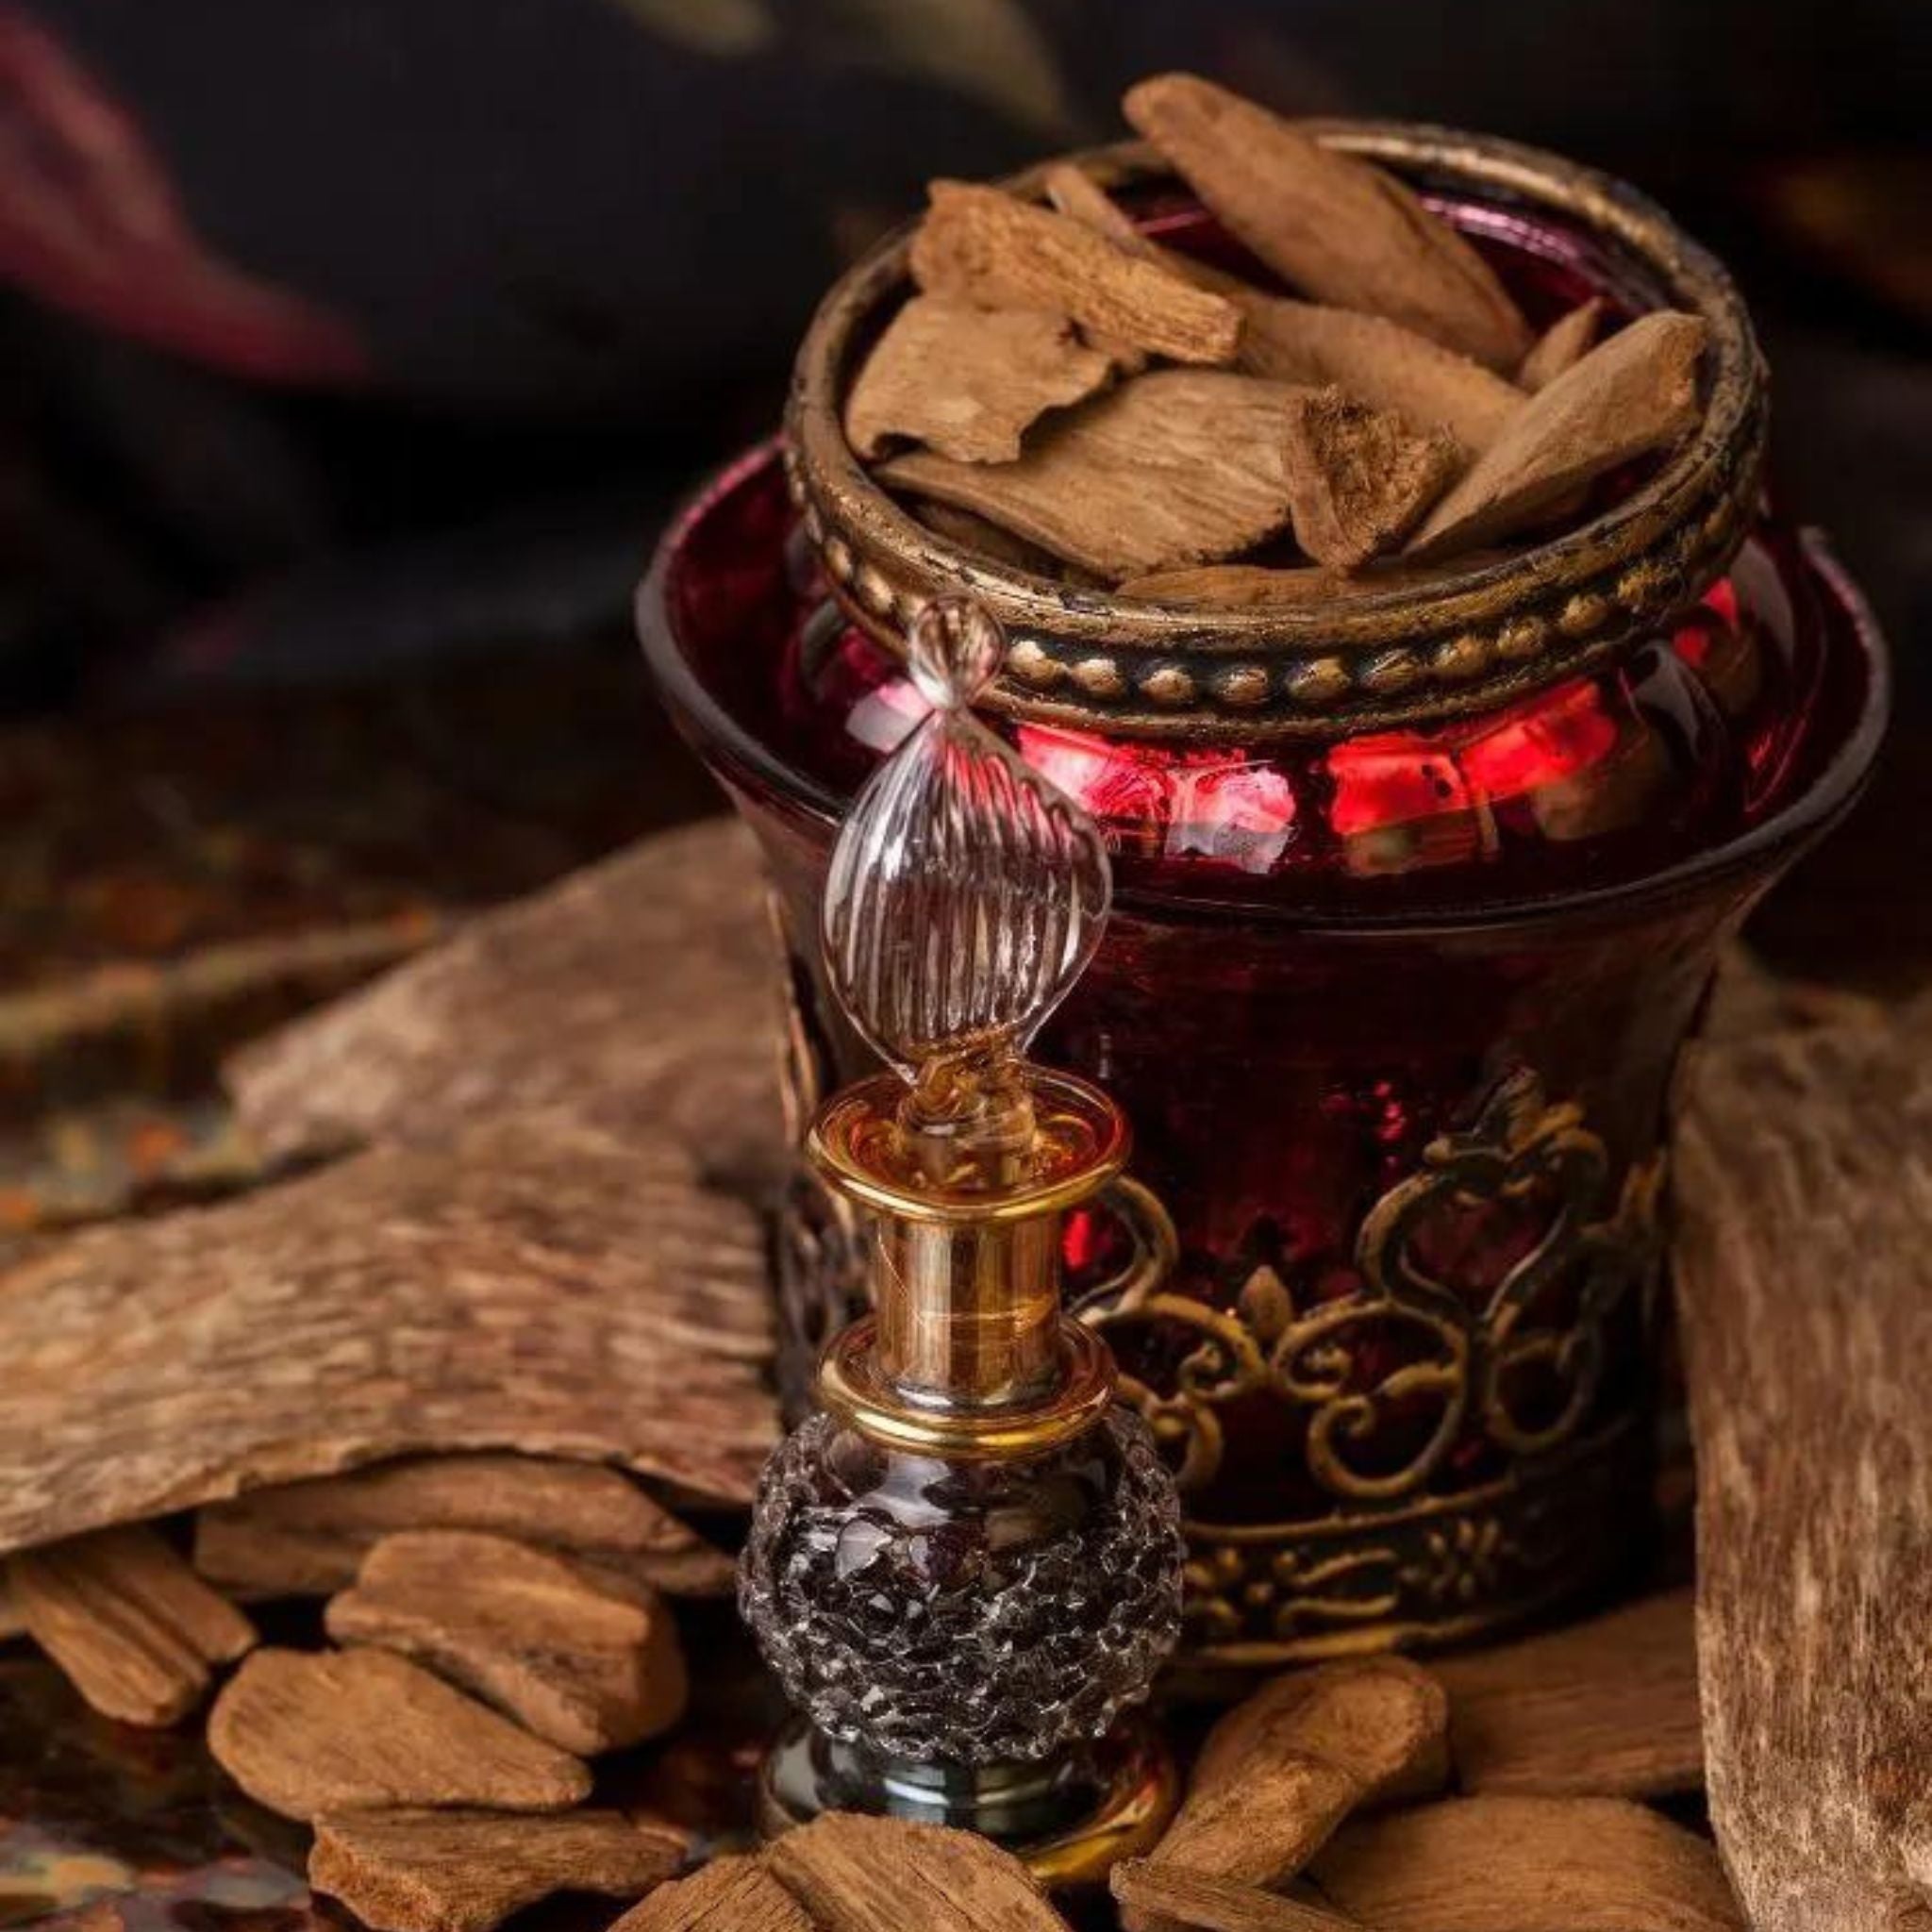 Tobacco Leaf Ambered Fragrance Oil Exporter and Supplier in Dubai (UAE).